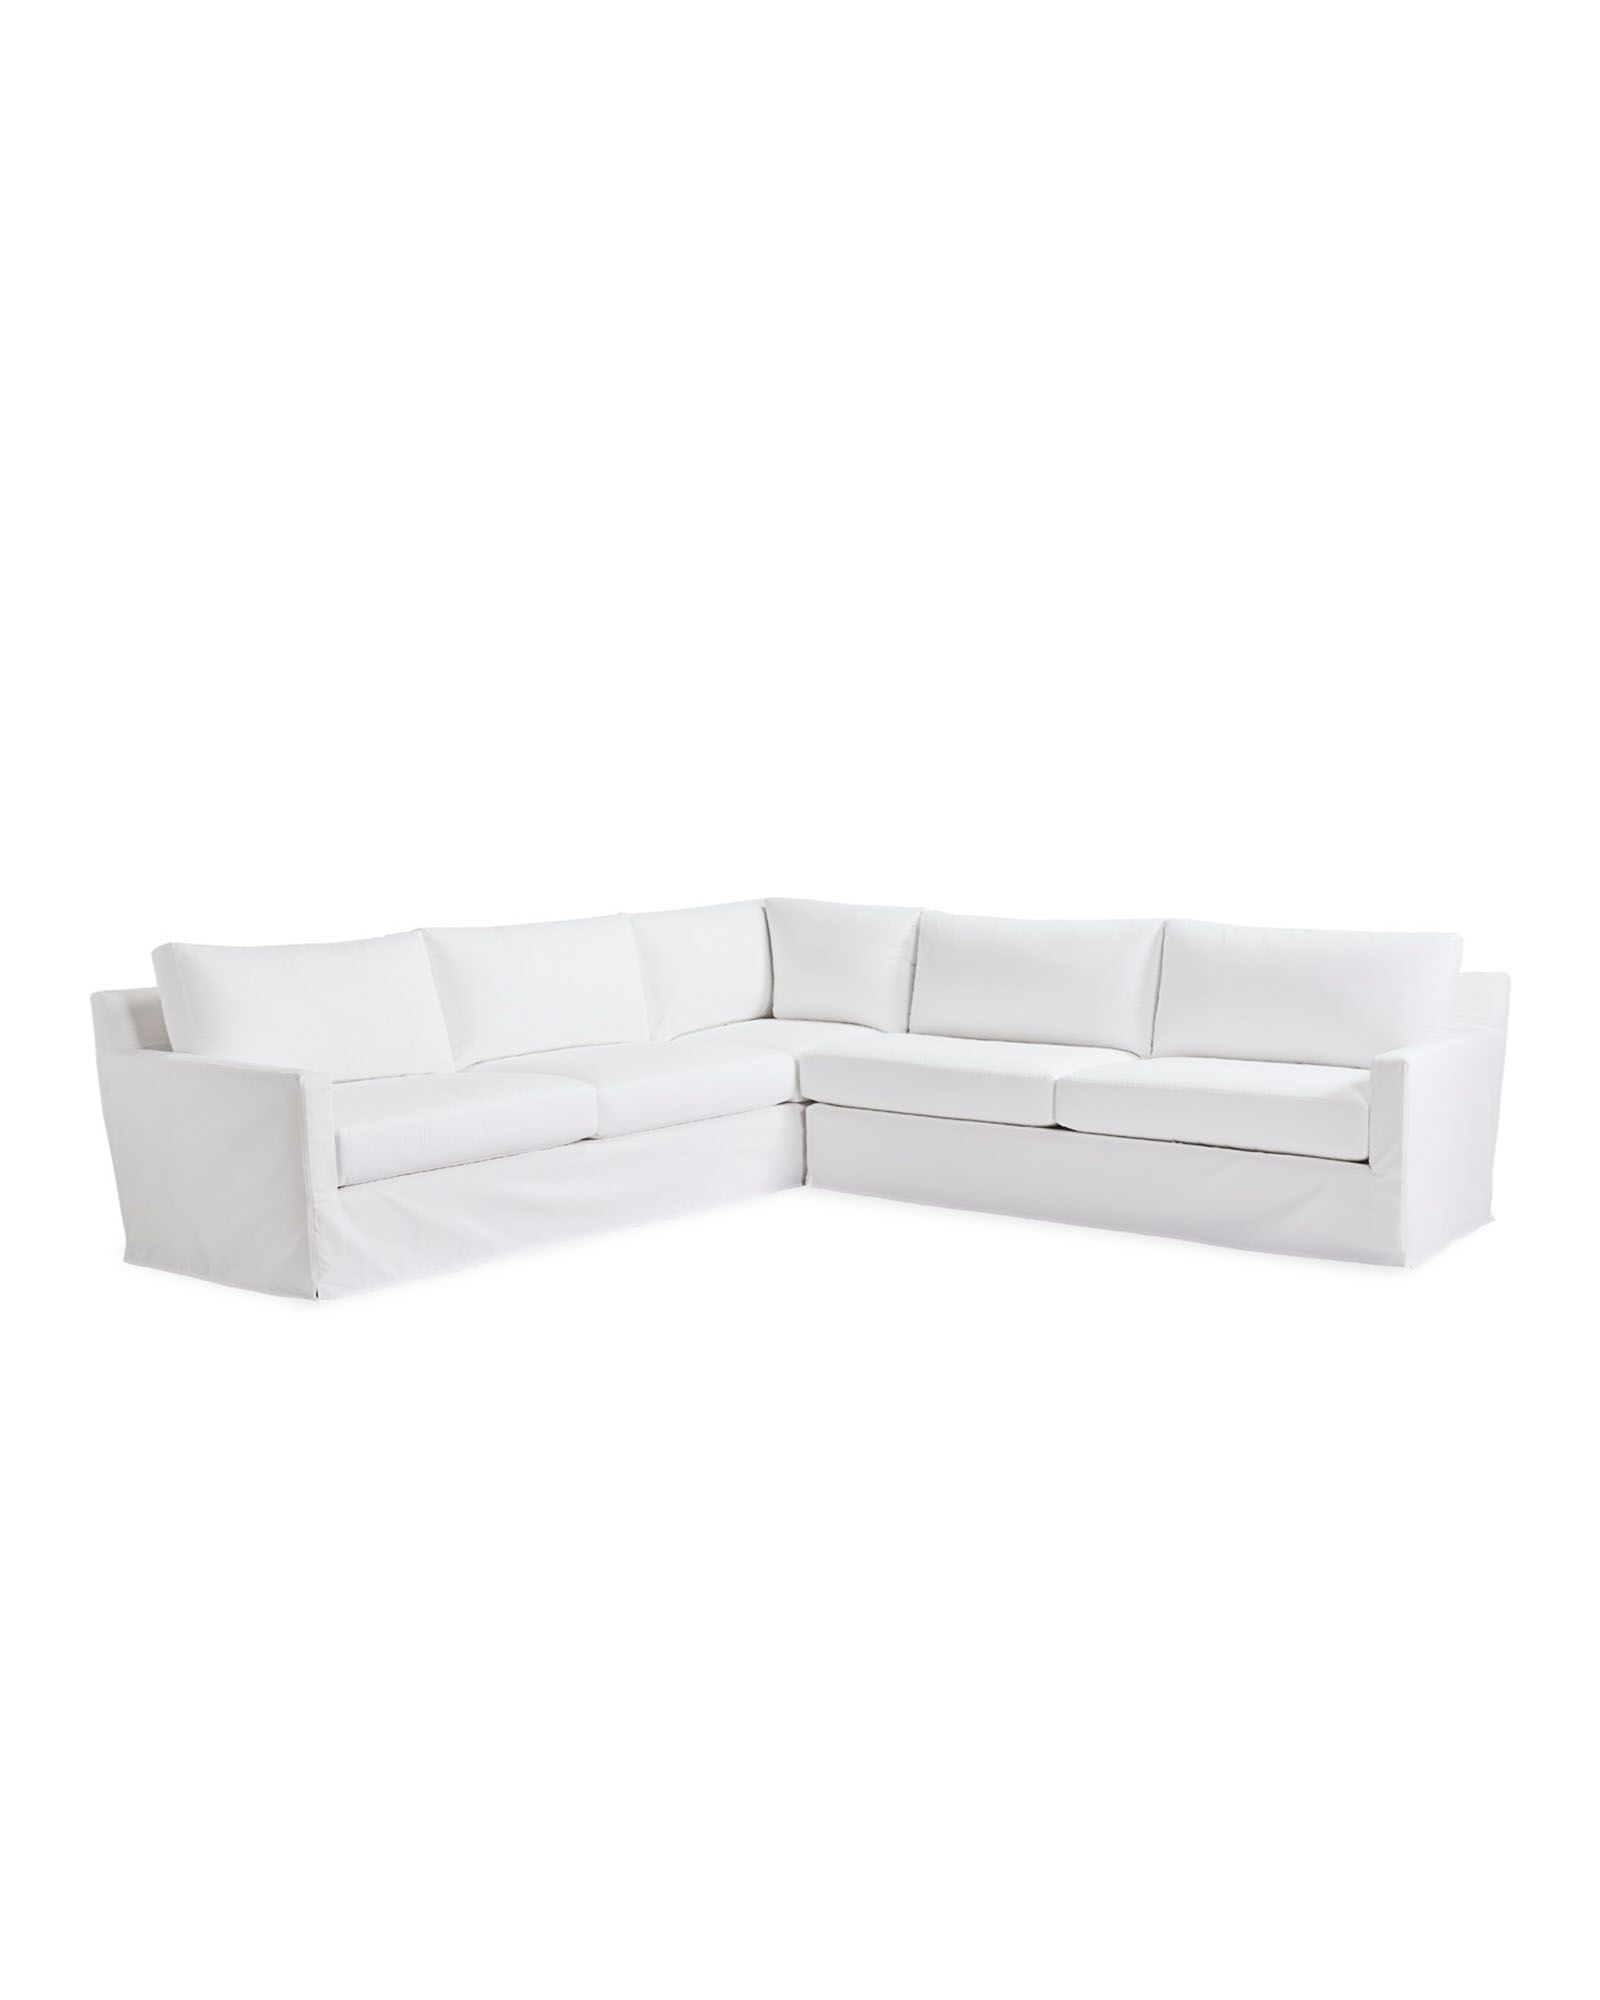 Summit Slipcovered L-Sectional - Right-Facing | Serena and Lily